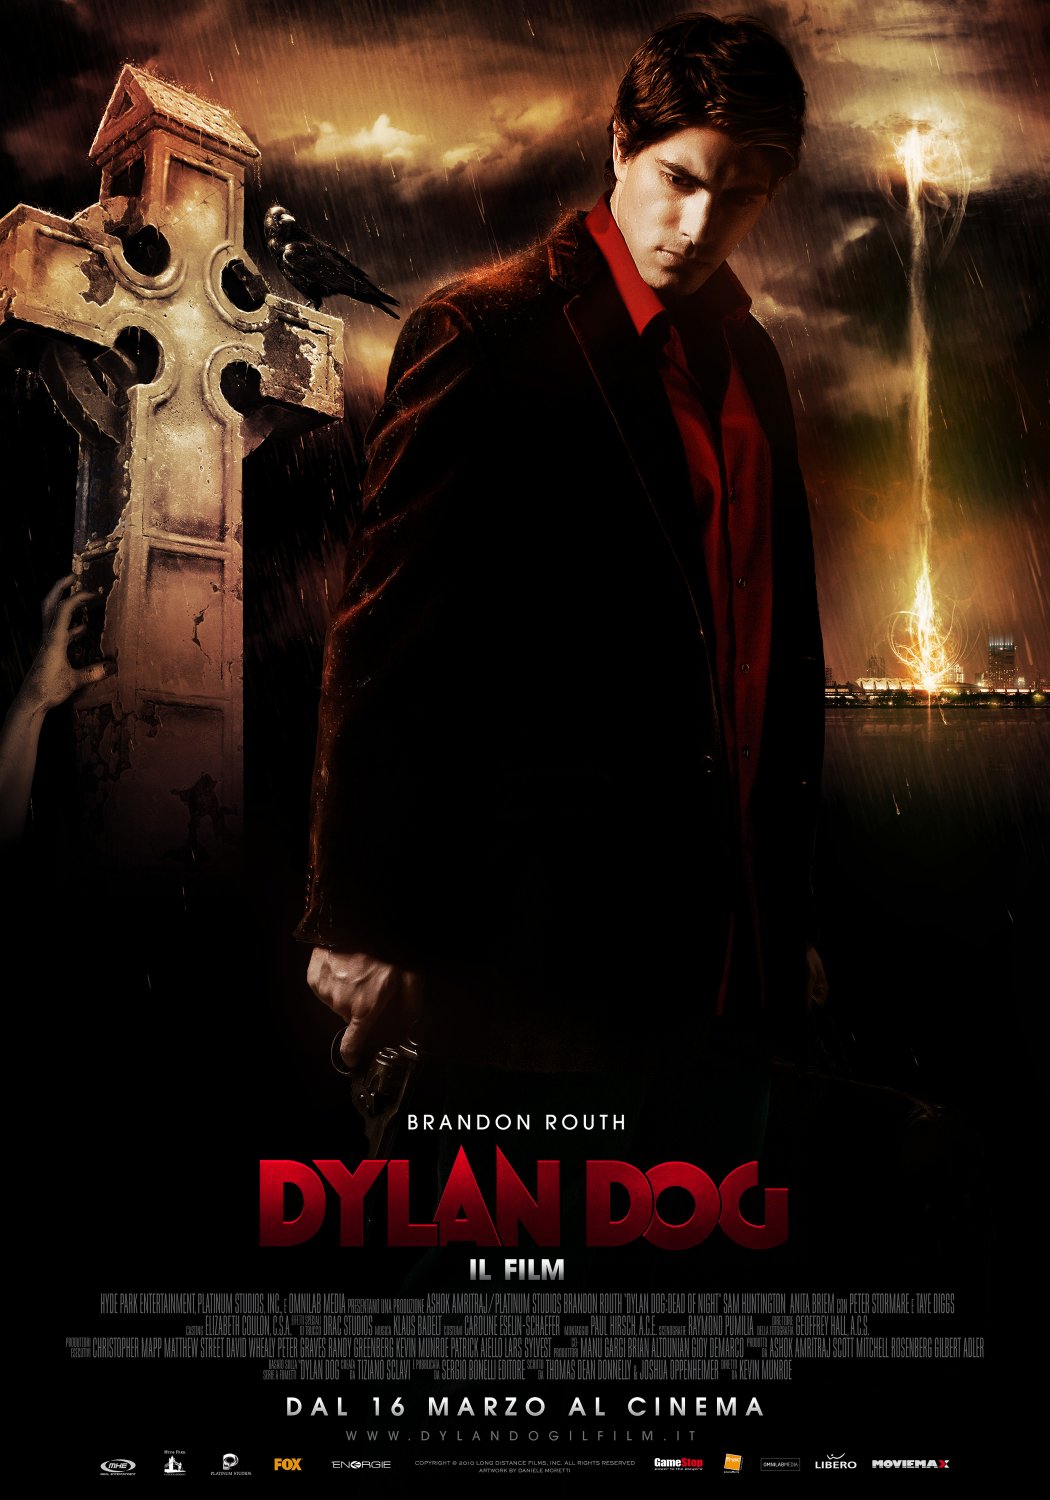 ҹ֮/D+̽:Ѫǣɥʬ Dylan.Dog.Dead.of.Night.2011.1080p.BluRay.x264.DTS-FGT 9.50G-1.png